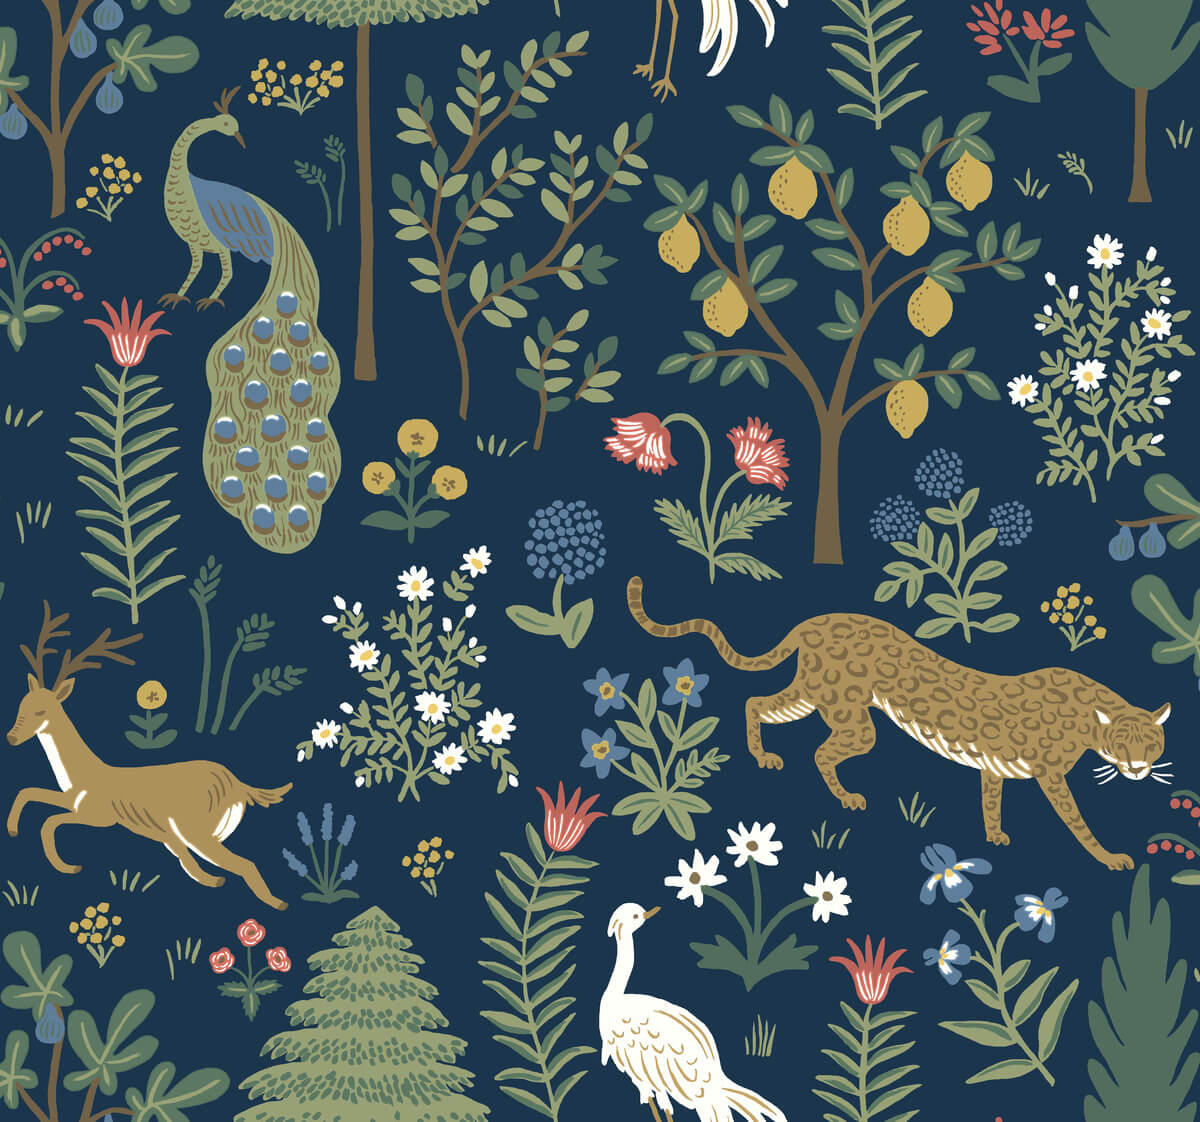 Rifle Paper Co. Second Edition Menagerie Wallpaper - SAMPLE